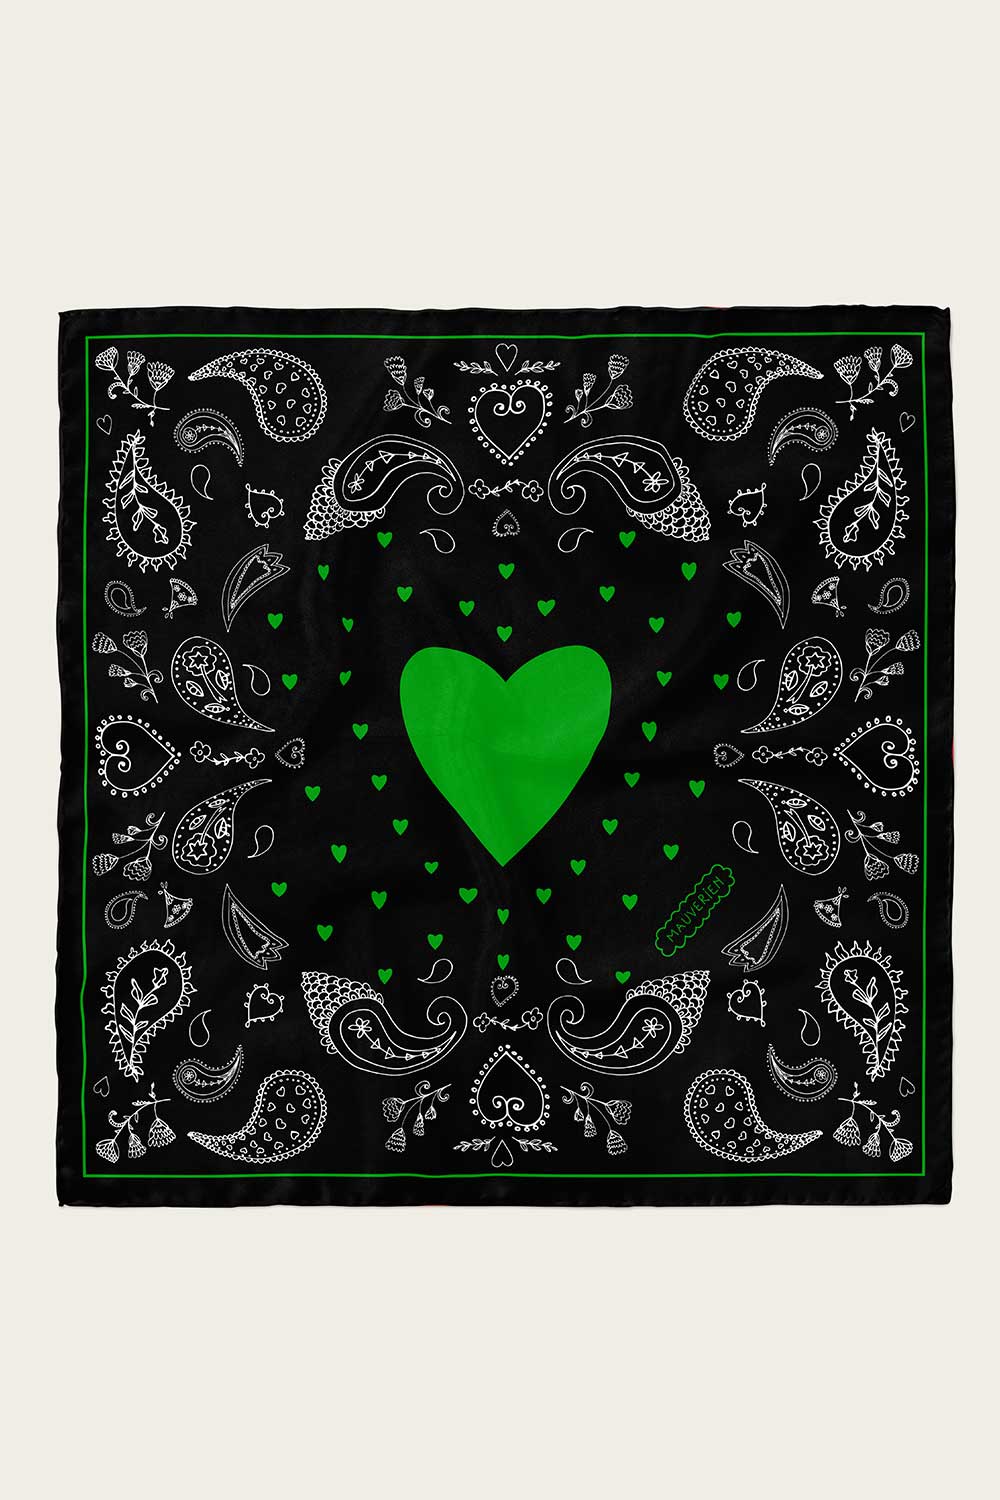 Silk scarf dark love with white and green paisley motif on black background by Mauverien.